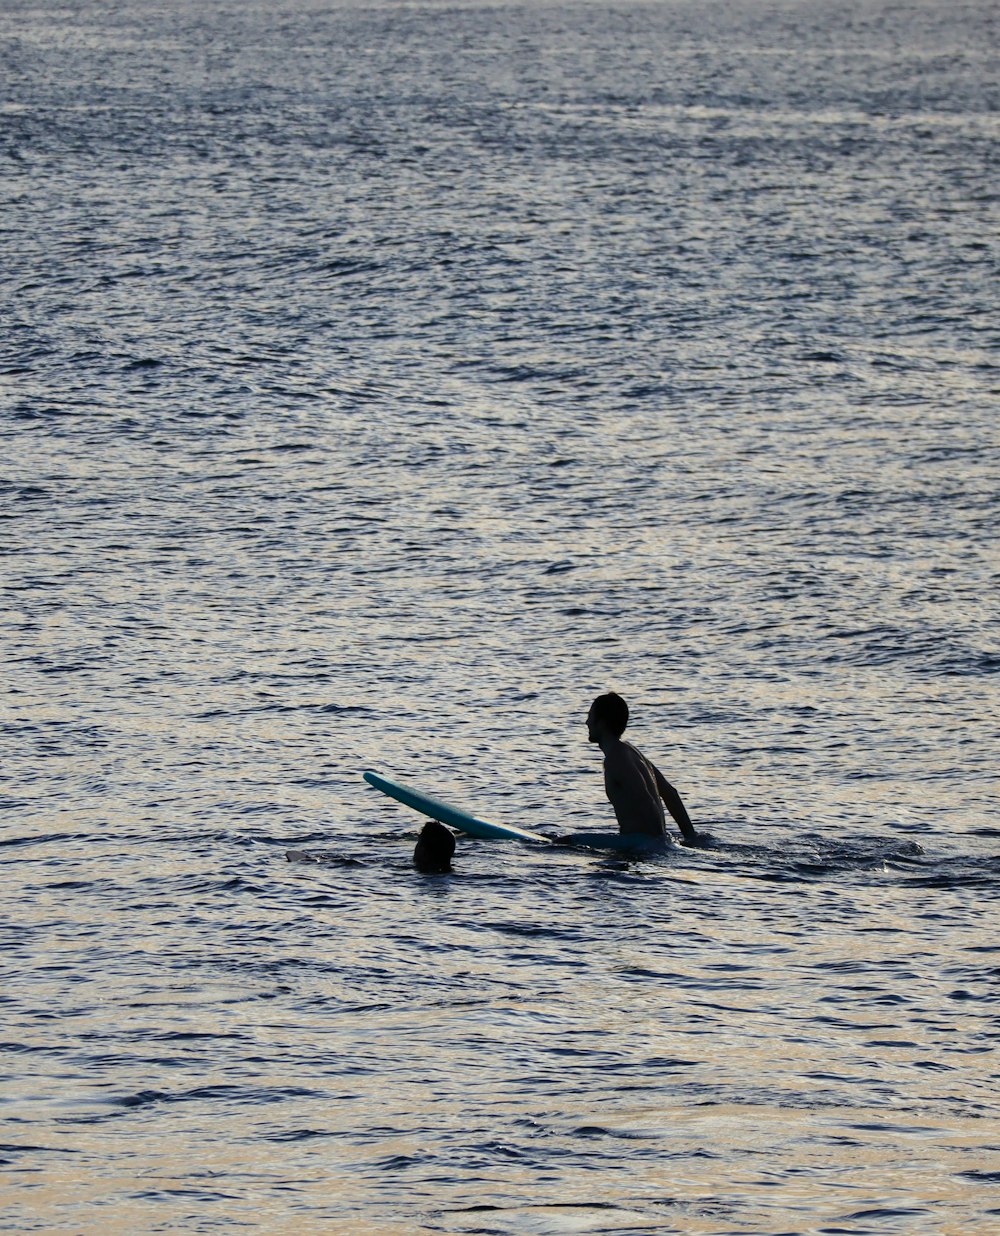 man in black wet suit riding on blue surfboard on body of water during daytime